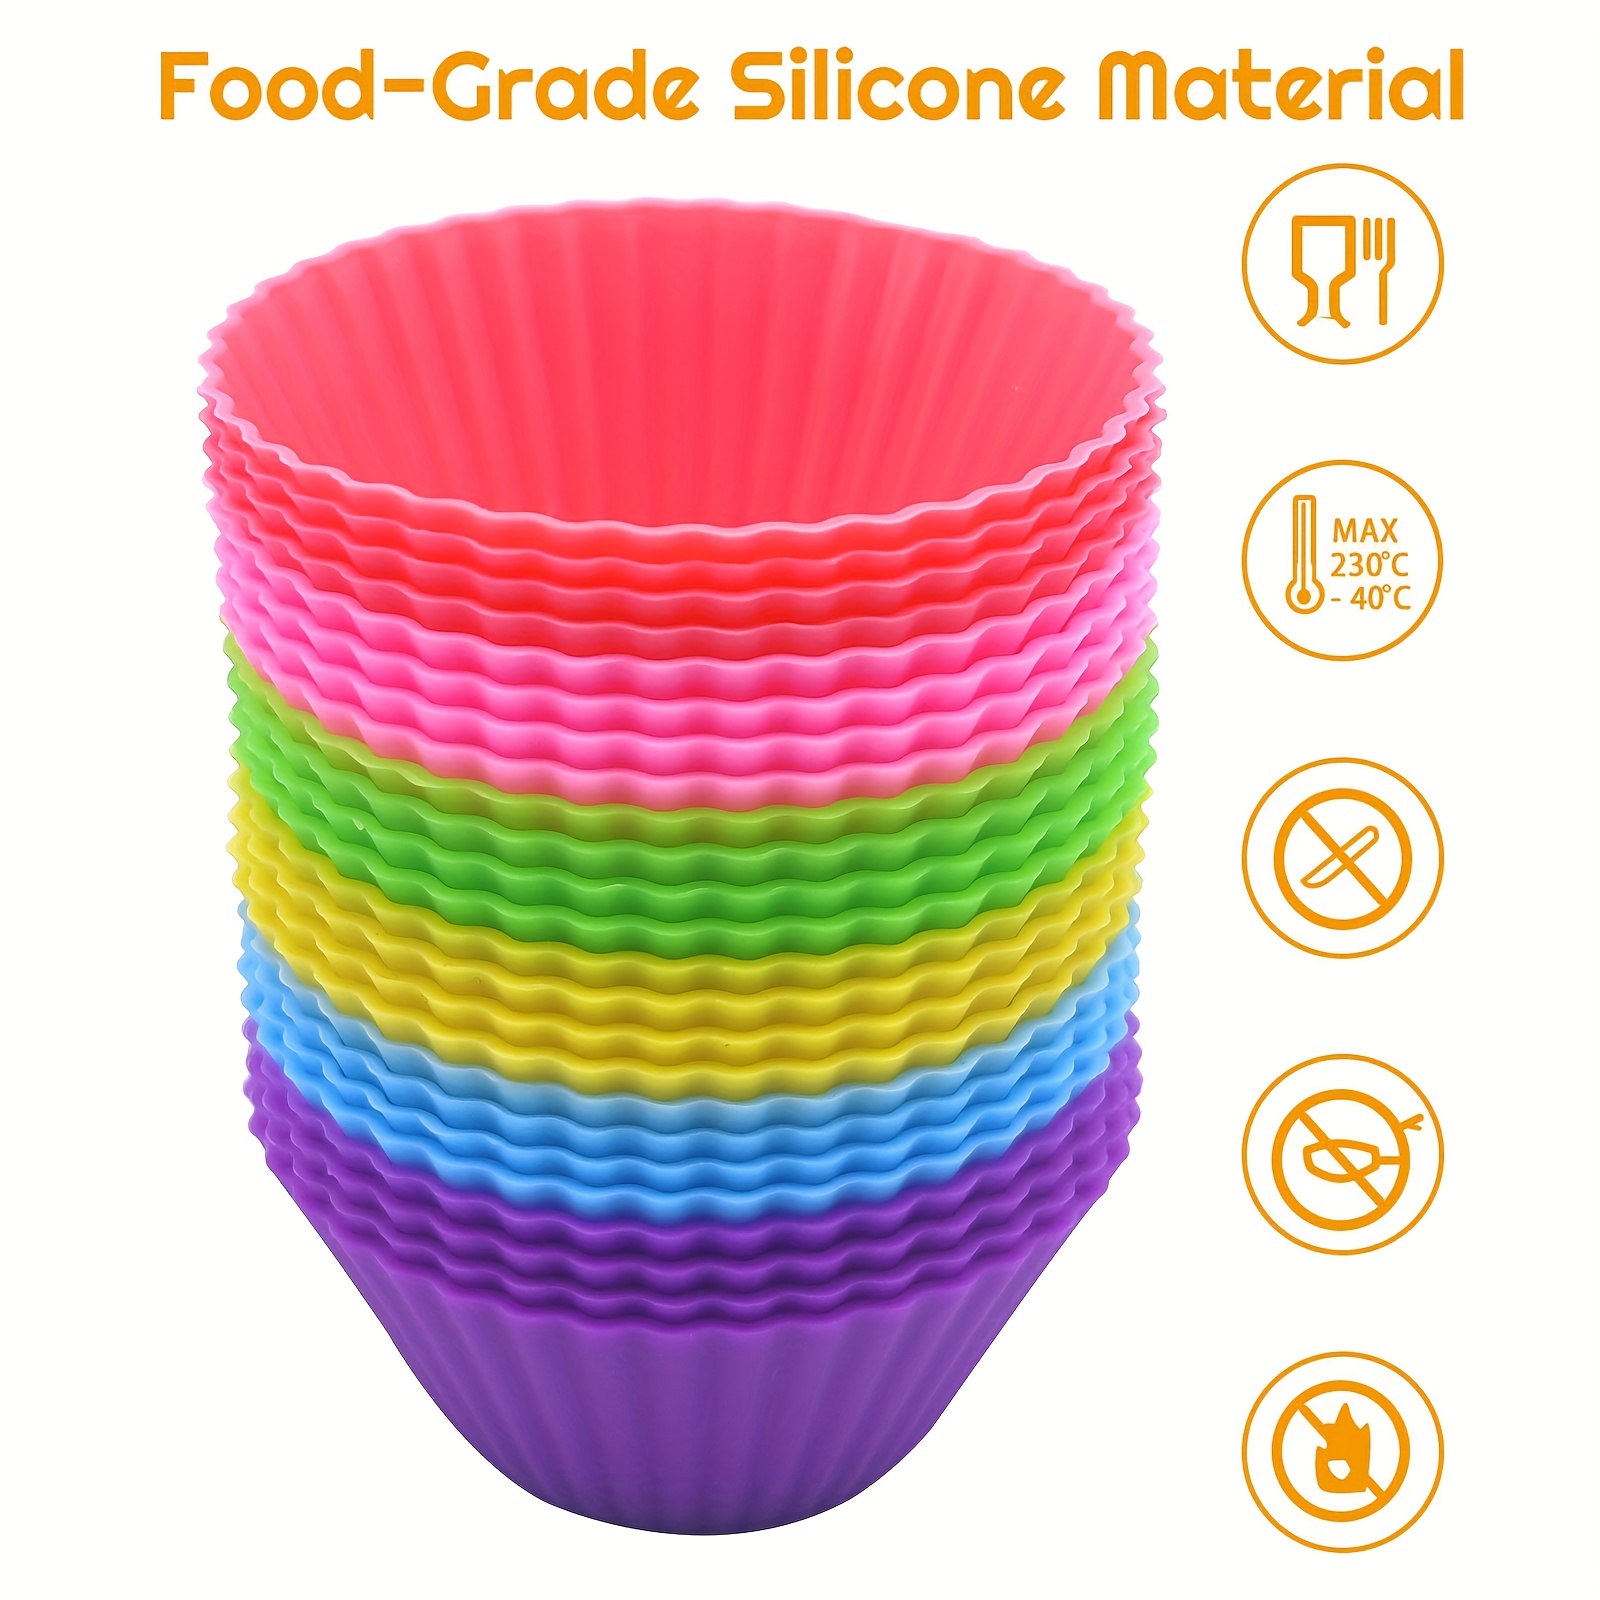 Silicone Cupcake Liners, 24pcs Silicone Baking Cups, Silicone Muffin Cups,  Reusable Silicone Cupcake Molds, for Baking Muffins, Cupcakes and Candies